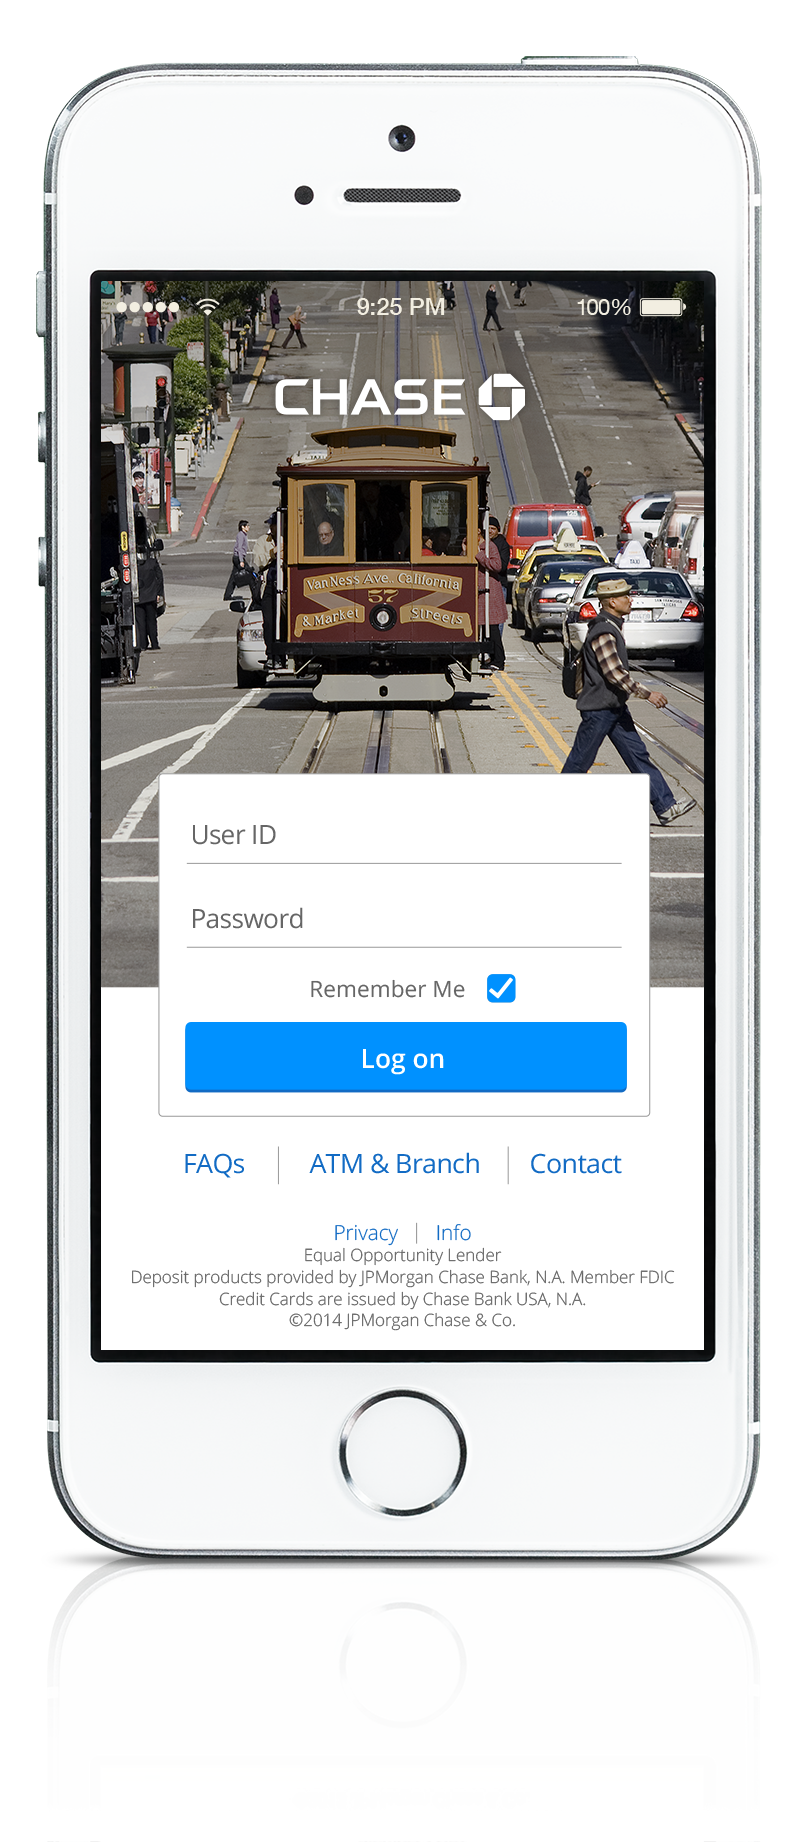 Chase on X: "Clean. Crisp. Fewer clicks. Meet the new Chase Mobile for  iPhone. https://t.co/mepHvD8QMw http://t.co/jFSfduhh8c" / X